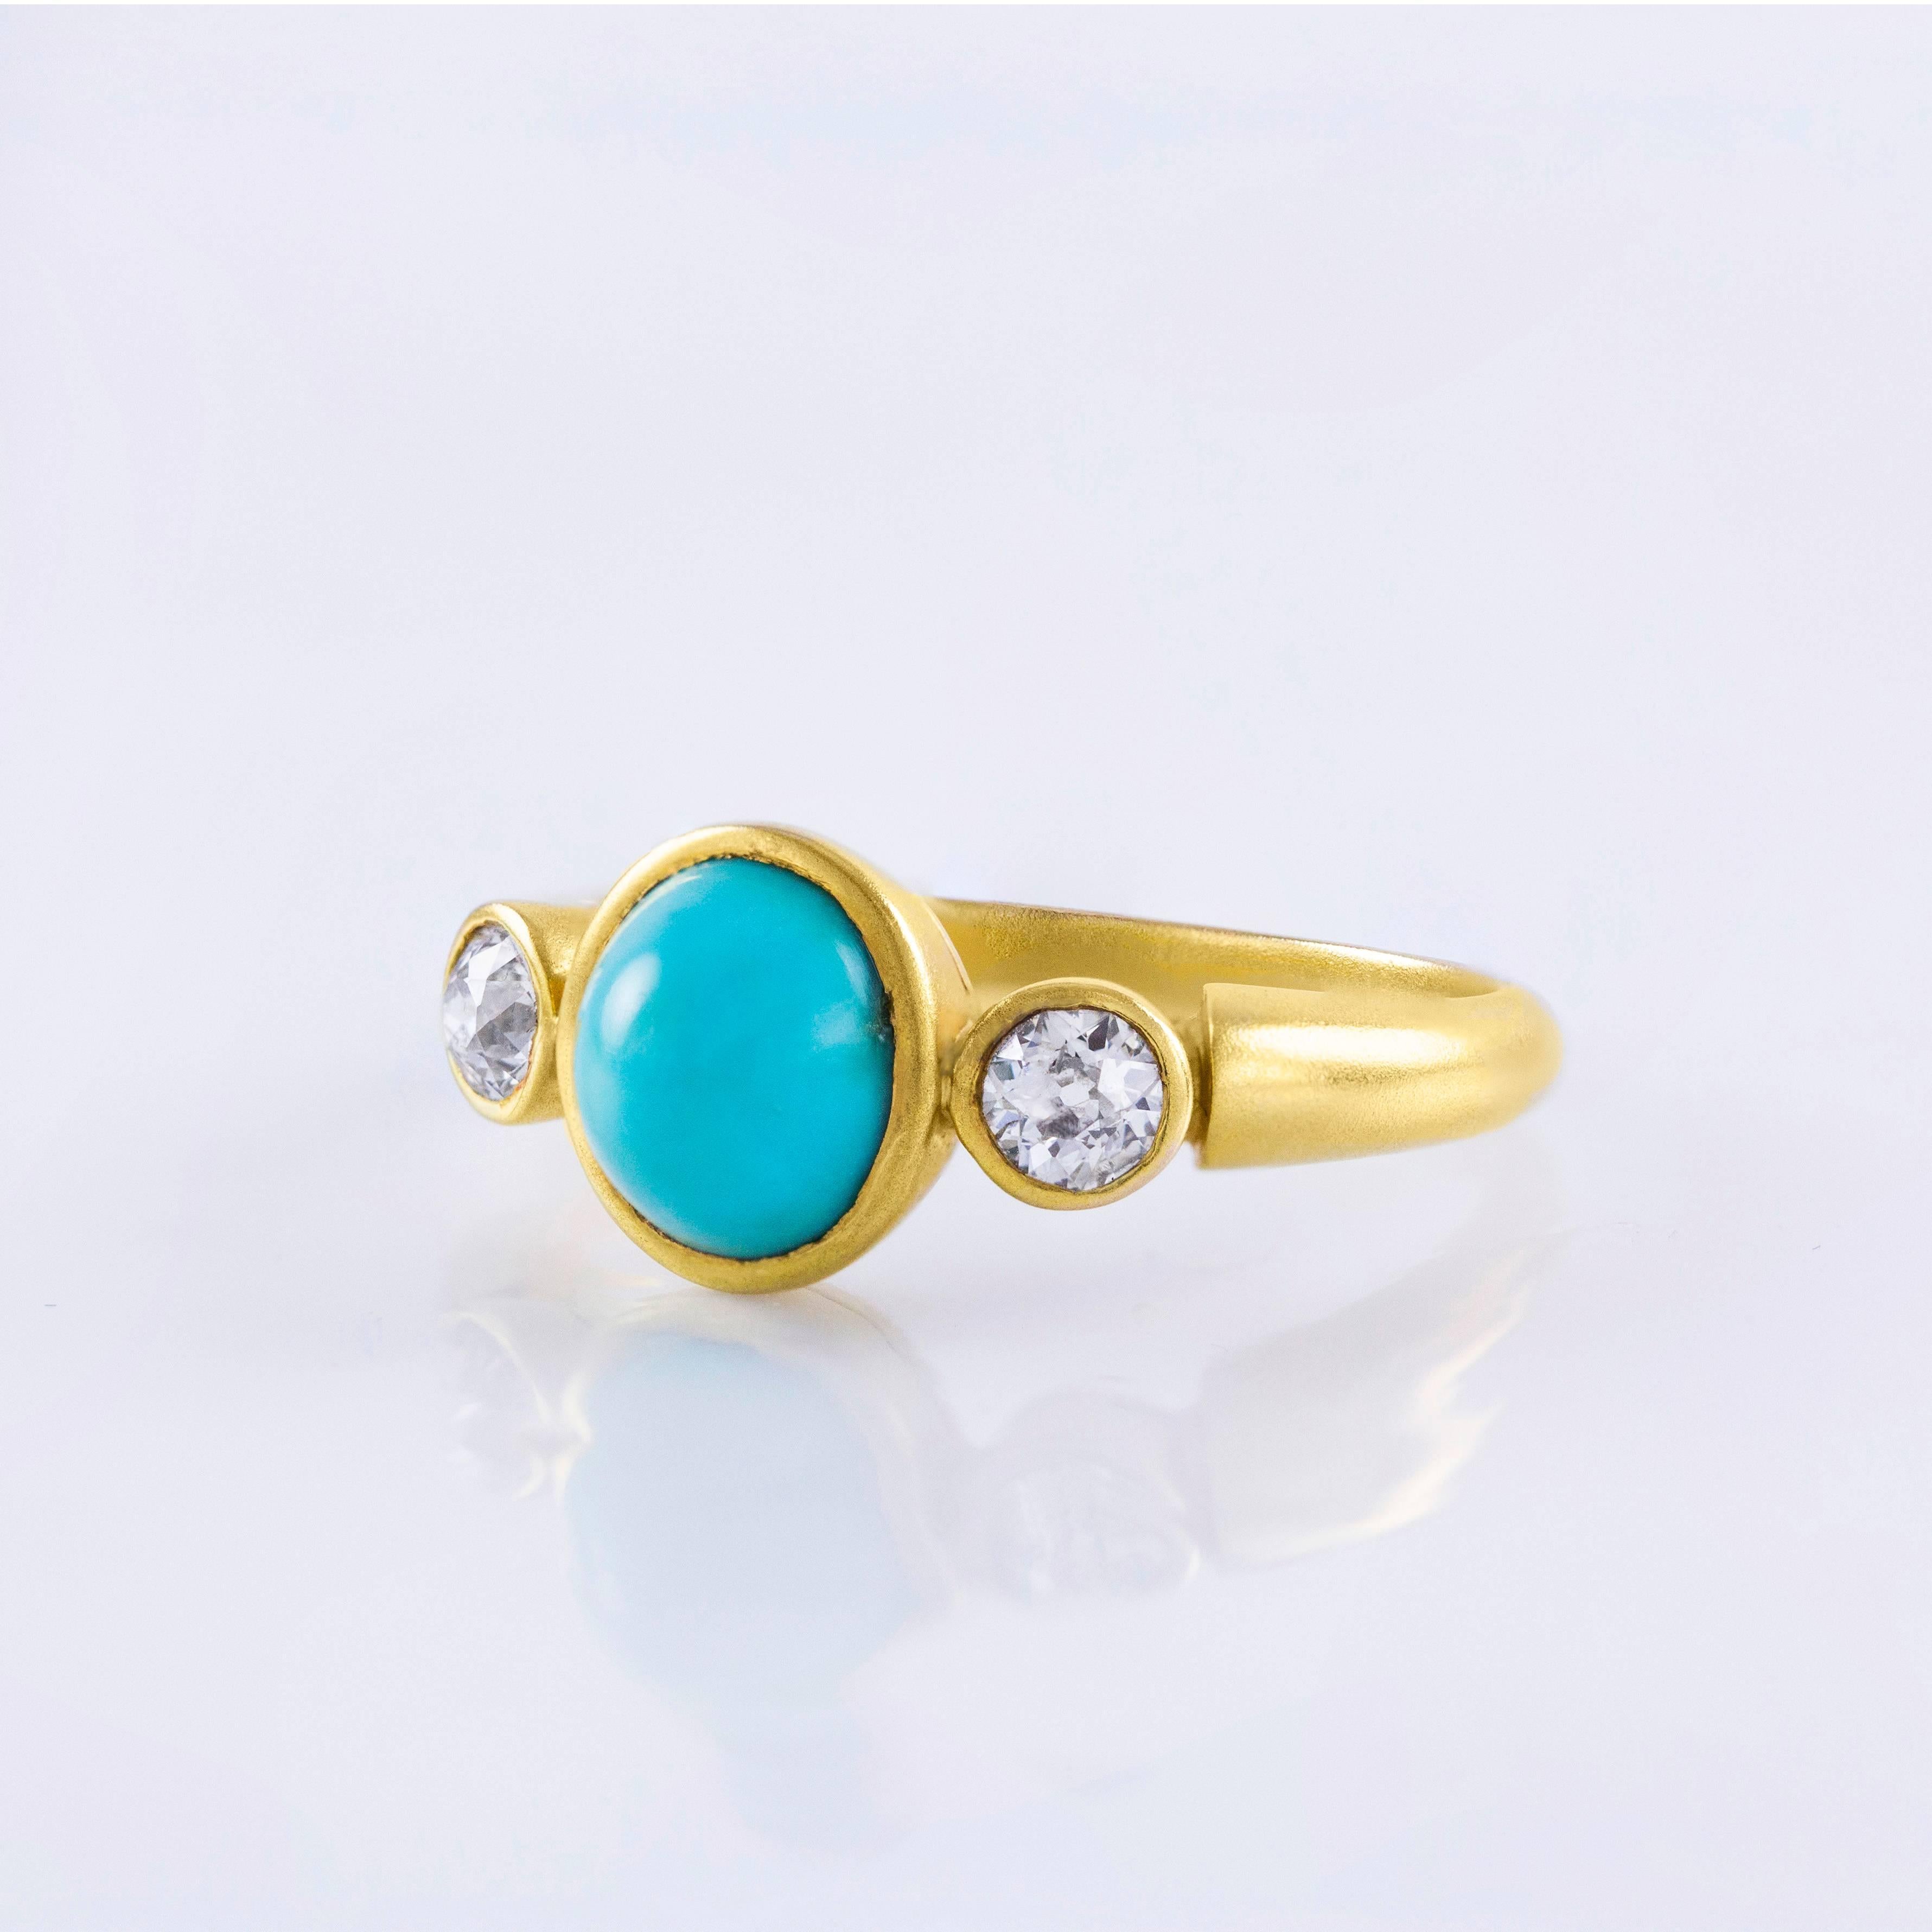 This ring is an estate piece set with a natural light blue turquoise center stone flanked by 2 old european cut diamond side stones. The diamonds weigh approximately 0.50 carats total. Made in 18k yellow gold. Size 8.5 US (sizable).